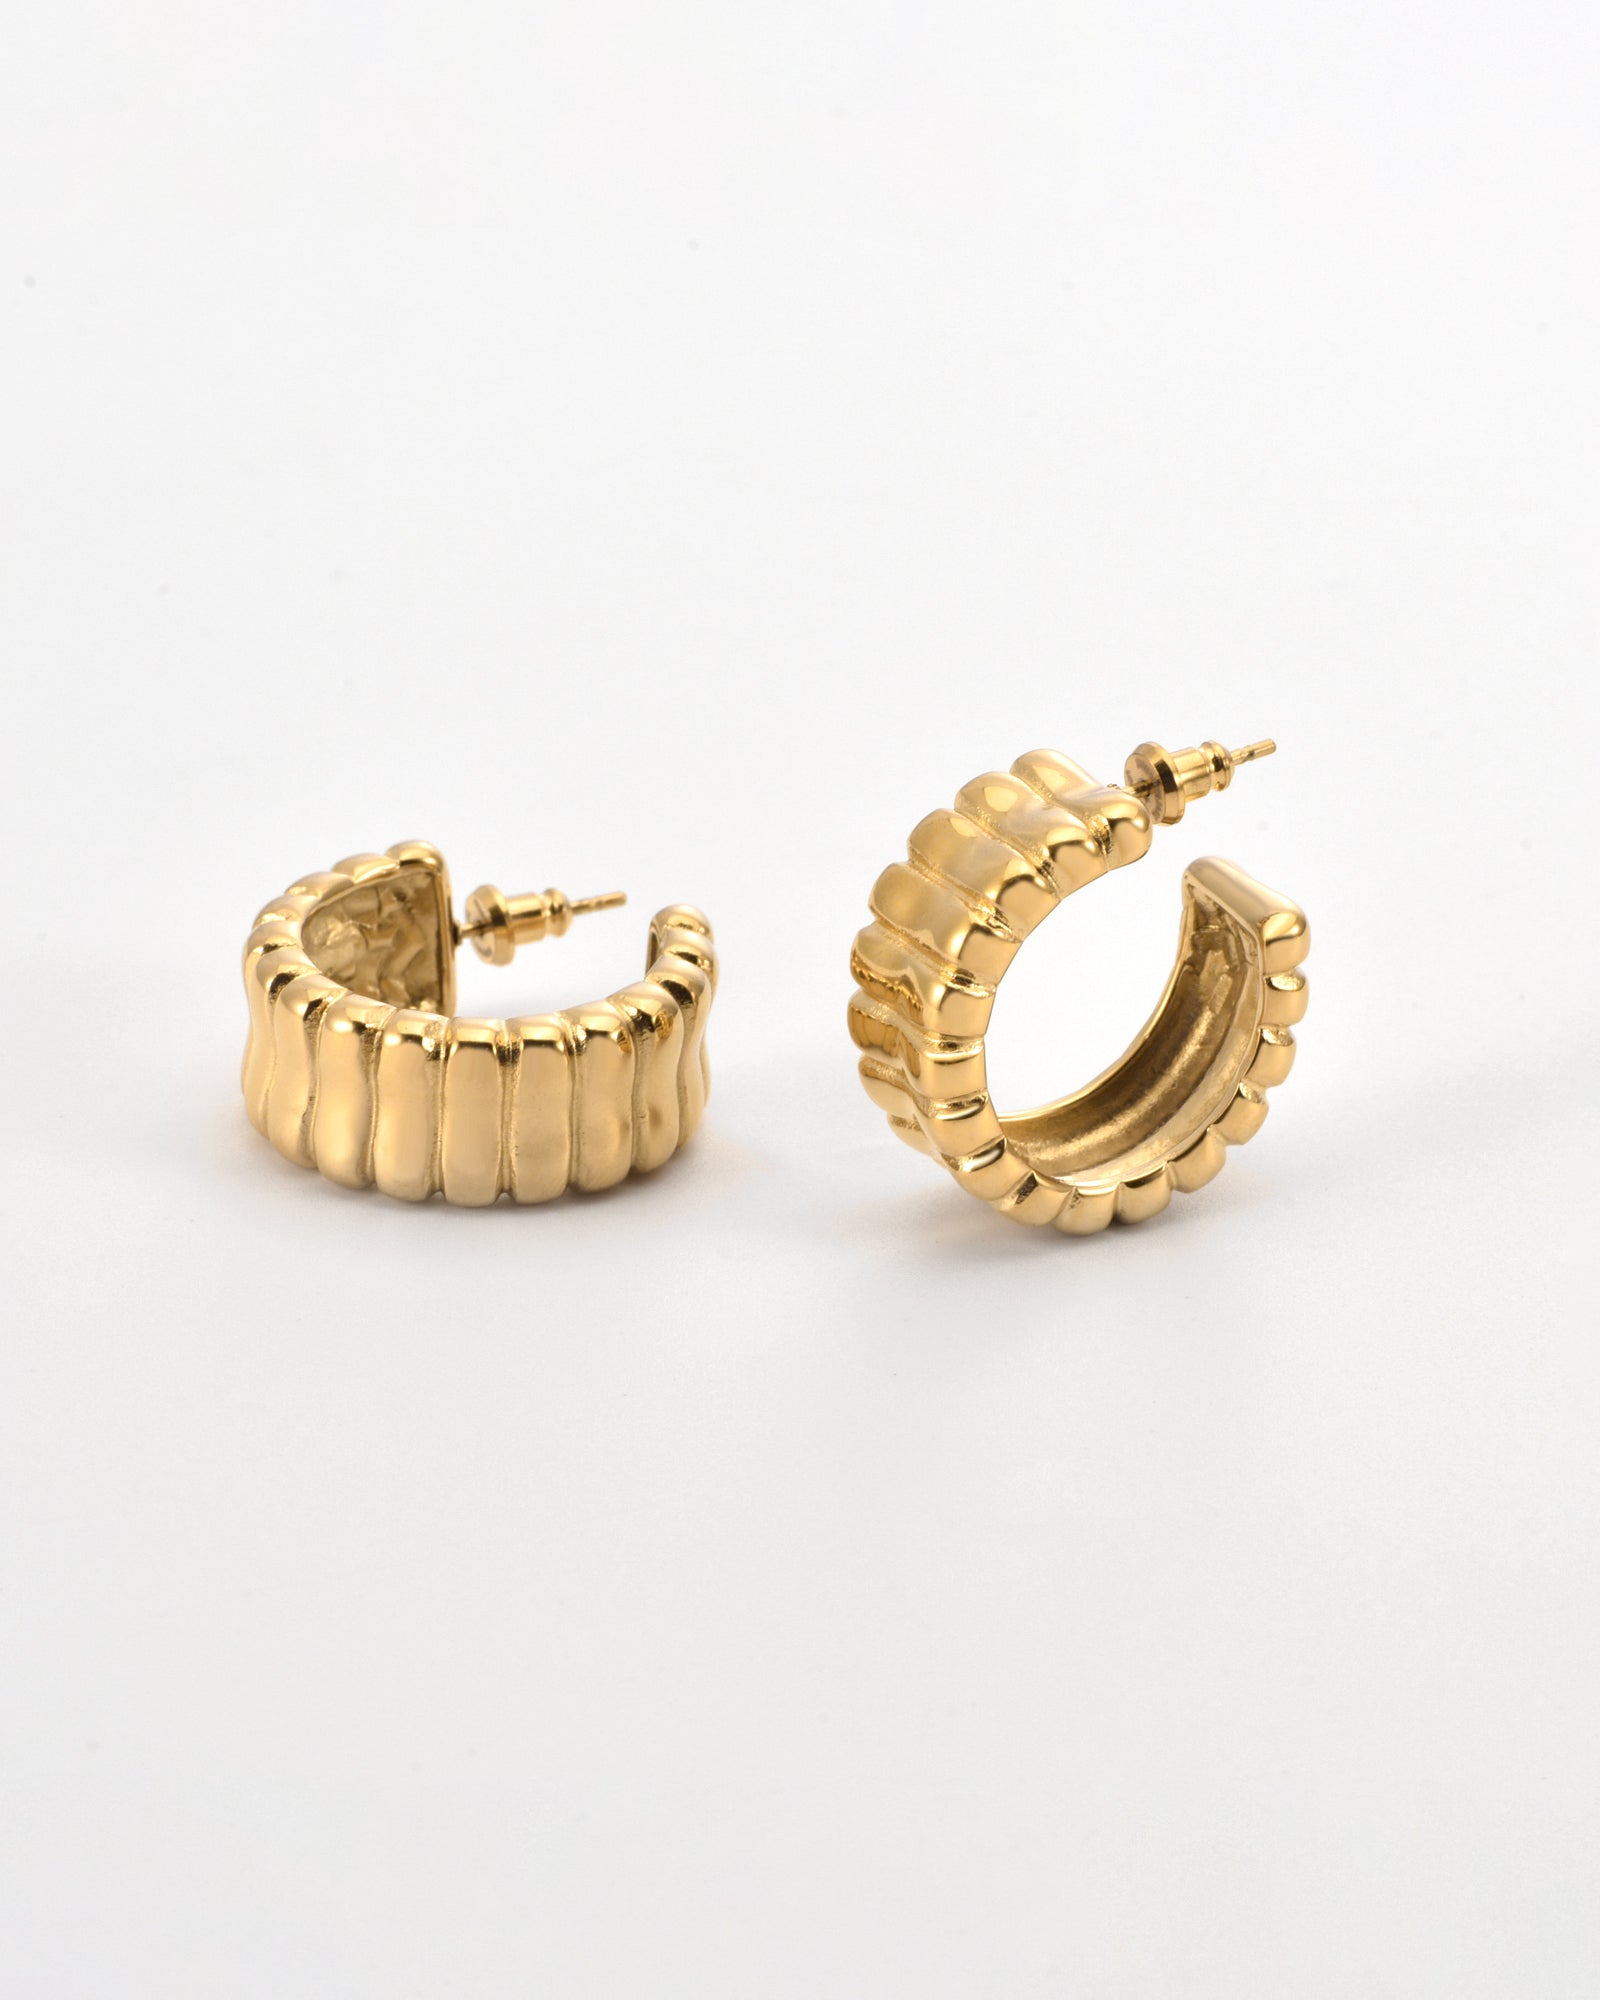 Close-up of a pair of For Art&#39;s Sake® Arch Earrings Gold with a ribbed texture. One earring is laying flat, while the other stands upright, showcasing their semi-circular design with a modern edge. The background is a plain, light surface.